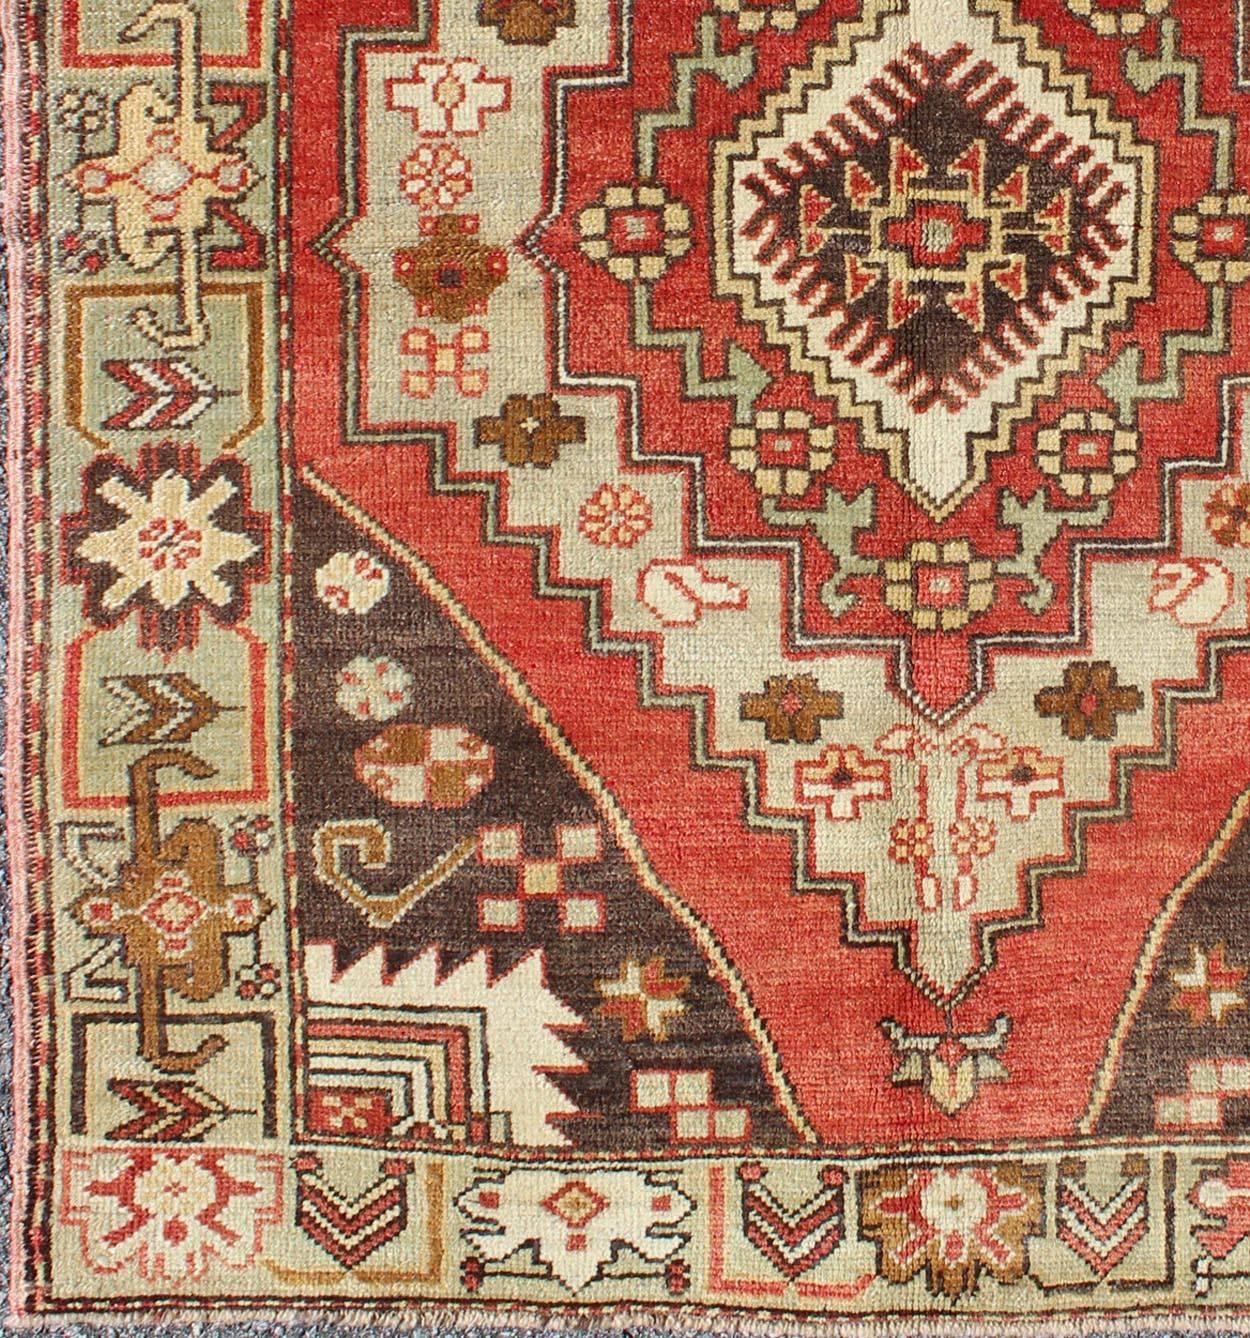 Multi-layered medallion vintage Turkish Oushak rug in red, brown, mint green, rug en-3914, country of origin / type: Turkey / Oushak, circa mid-20th century

This vintage Turkish Oushak rug (circa mid-20th century) features a unique blend of colors